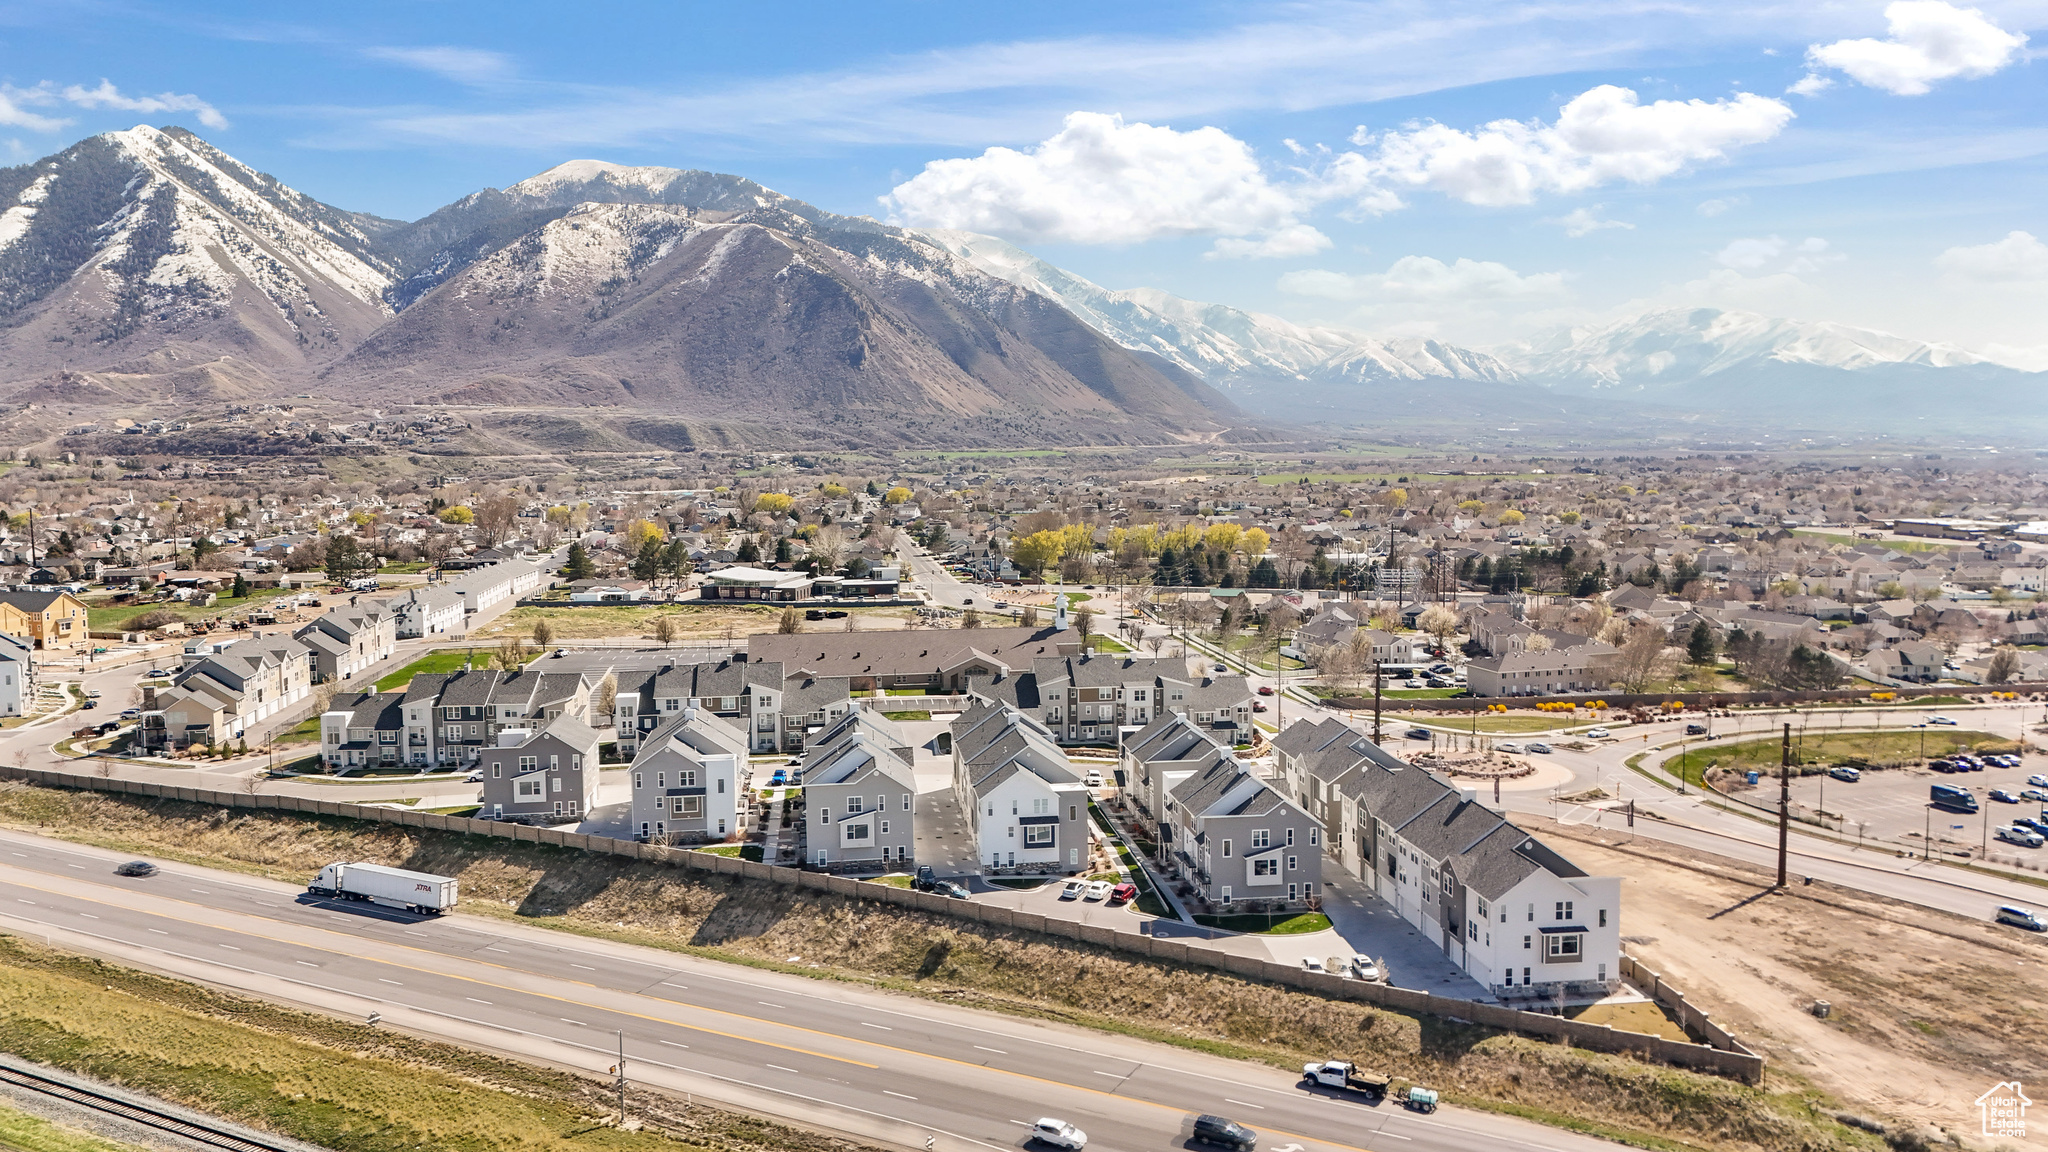 Drone / aerial view from the north showing proximity to Spanish Fork Canyon and Highway 6.